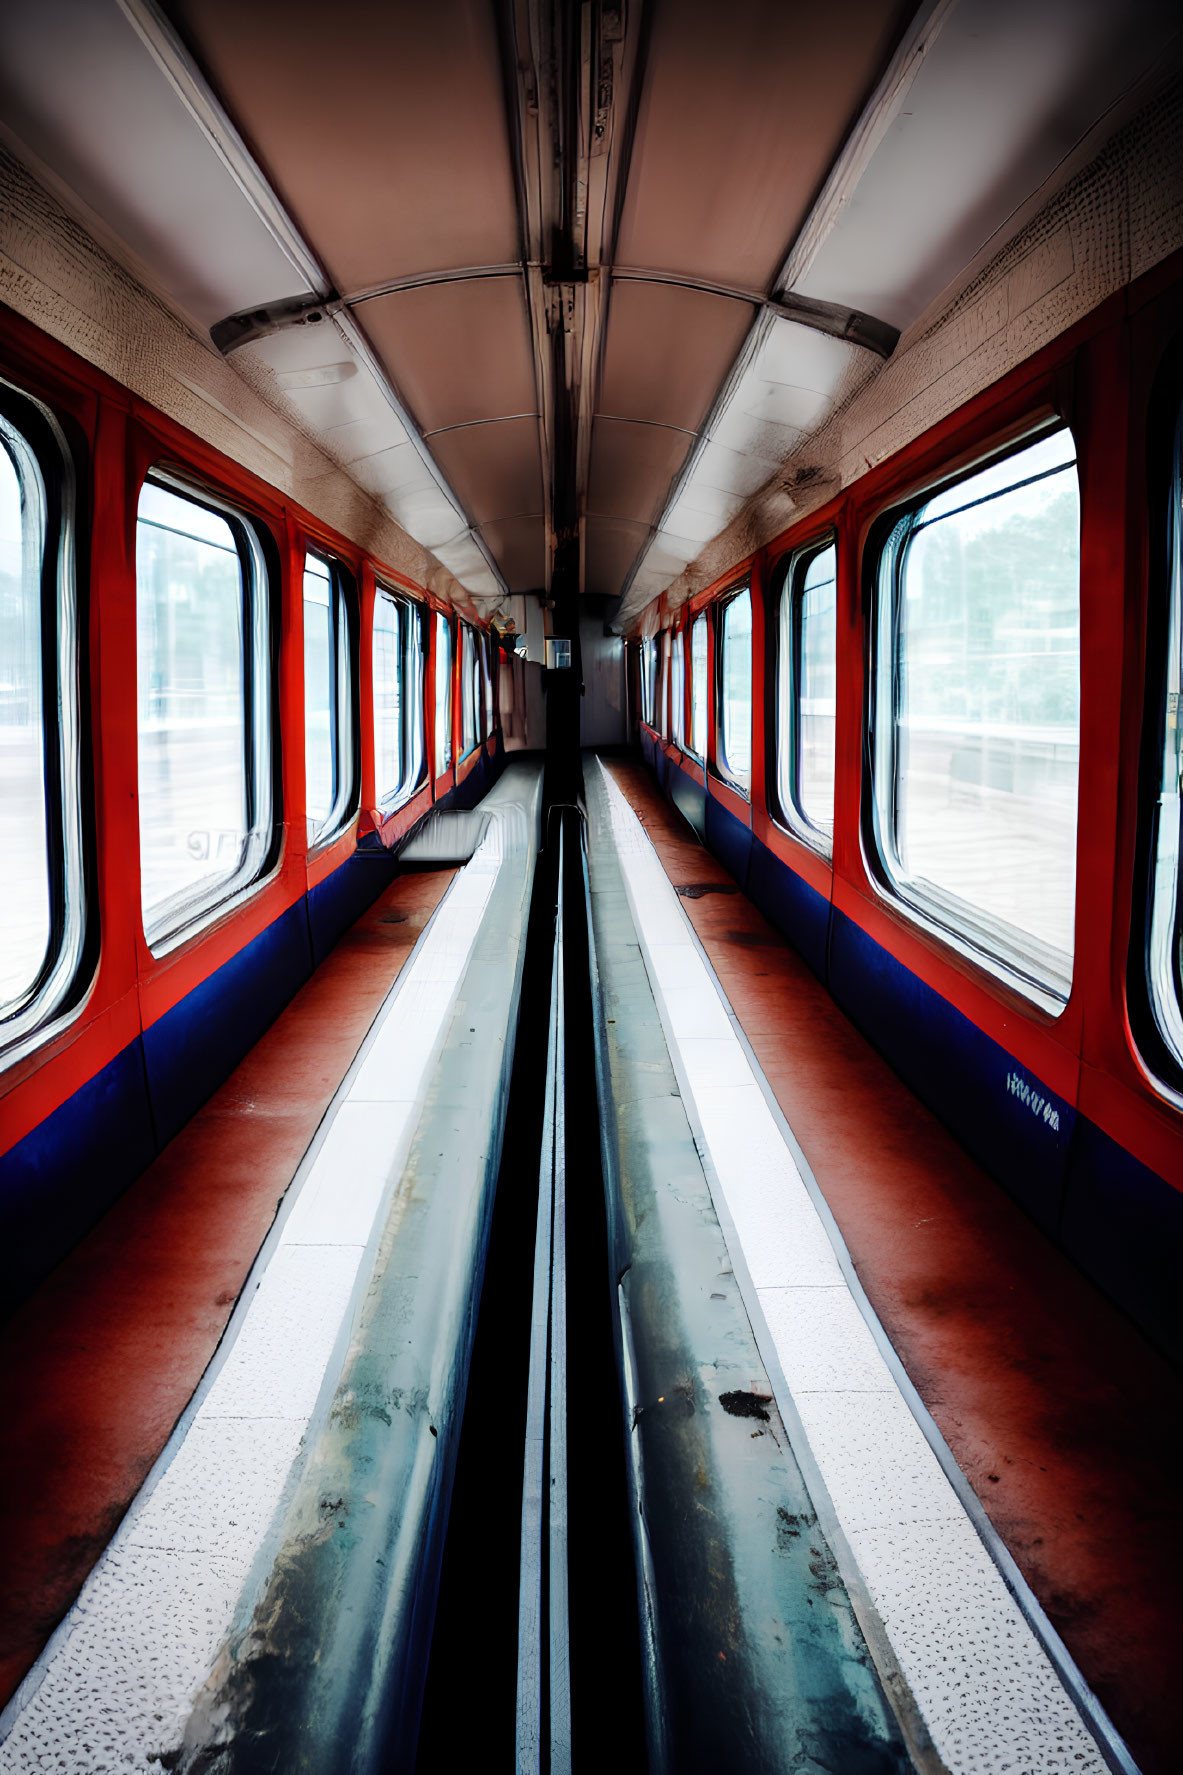 Symmetrical view of empty train car with red and blue seats